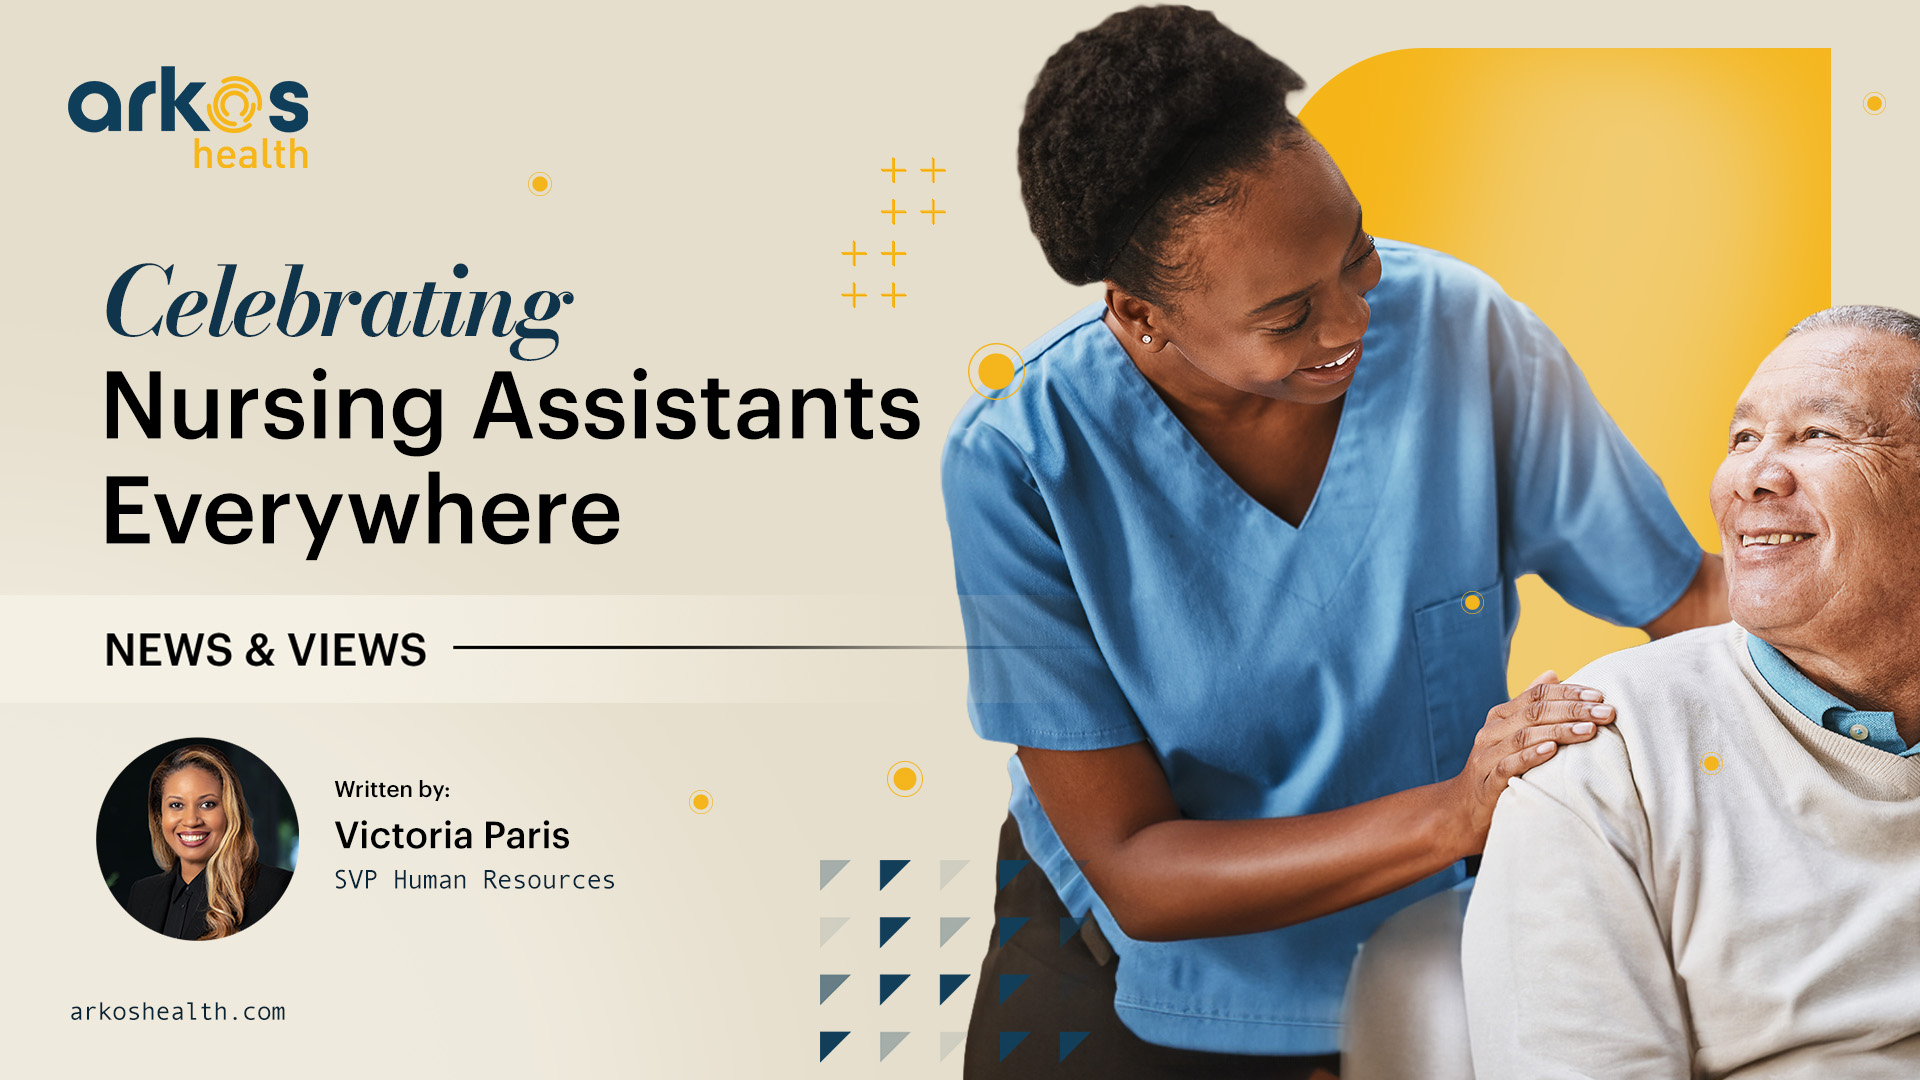 Recognizing The Nursing Assistants Who Provide Compassionate Care Every Day